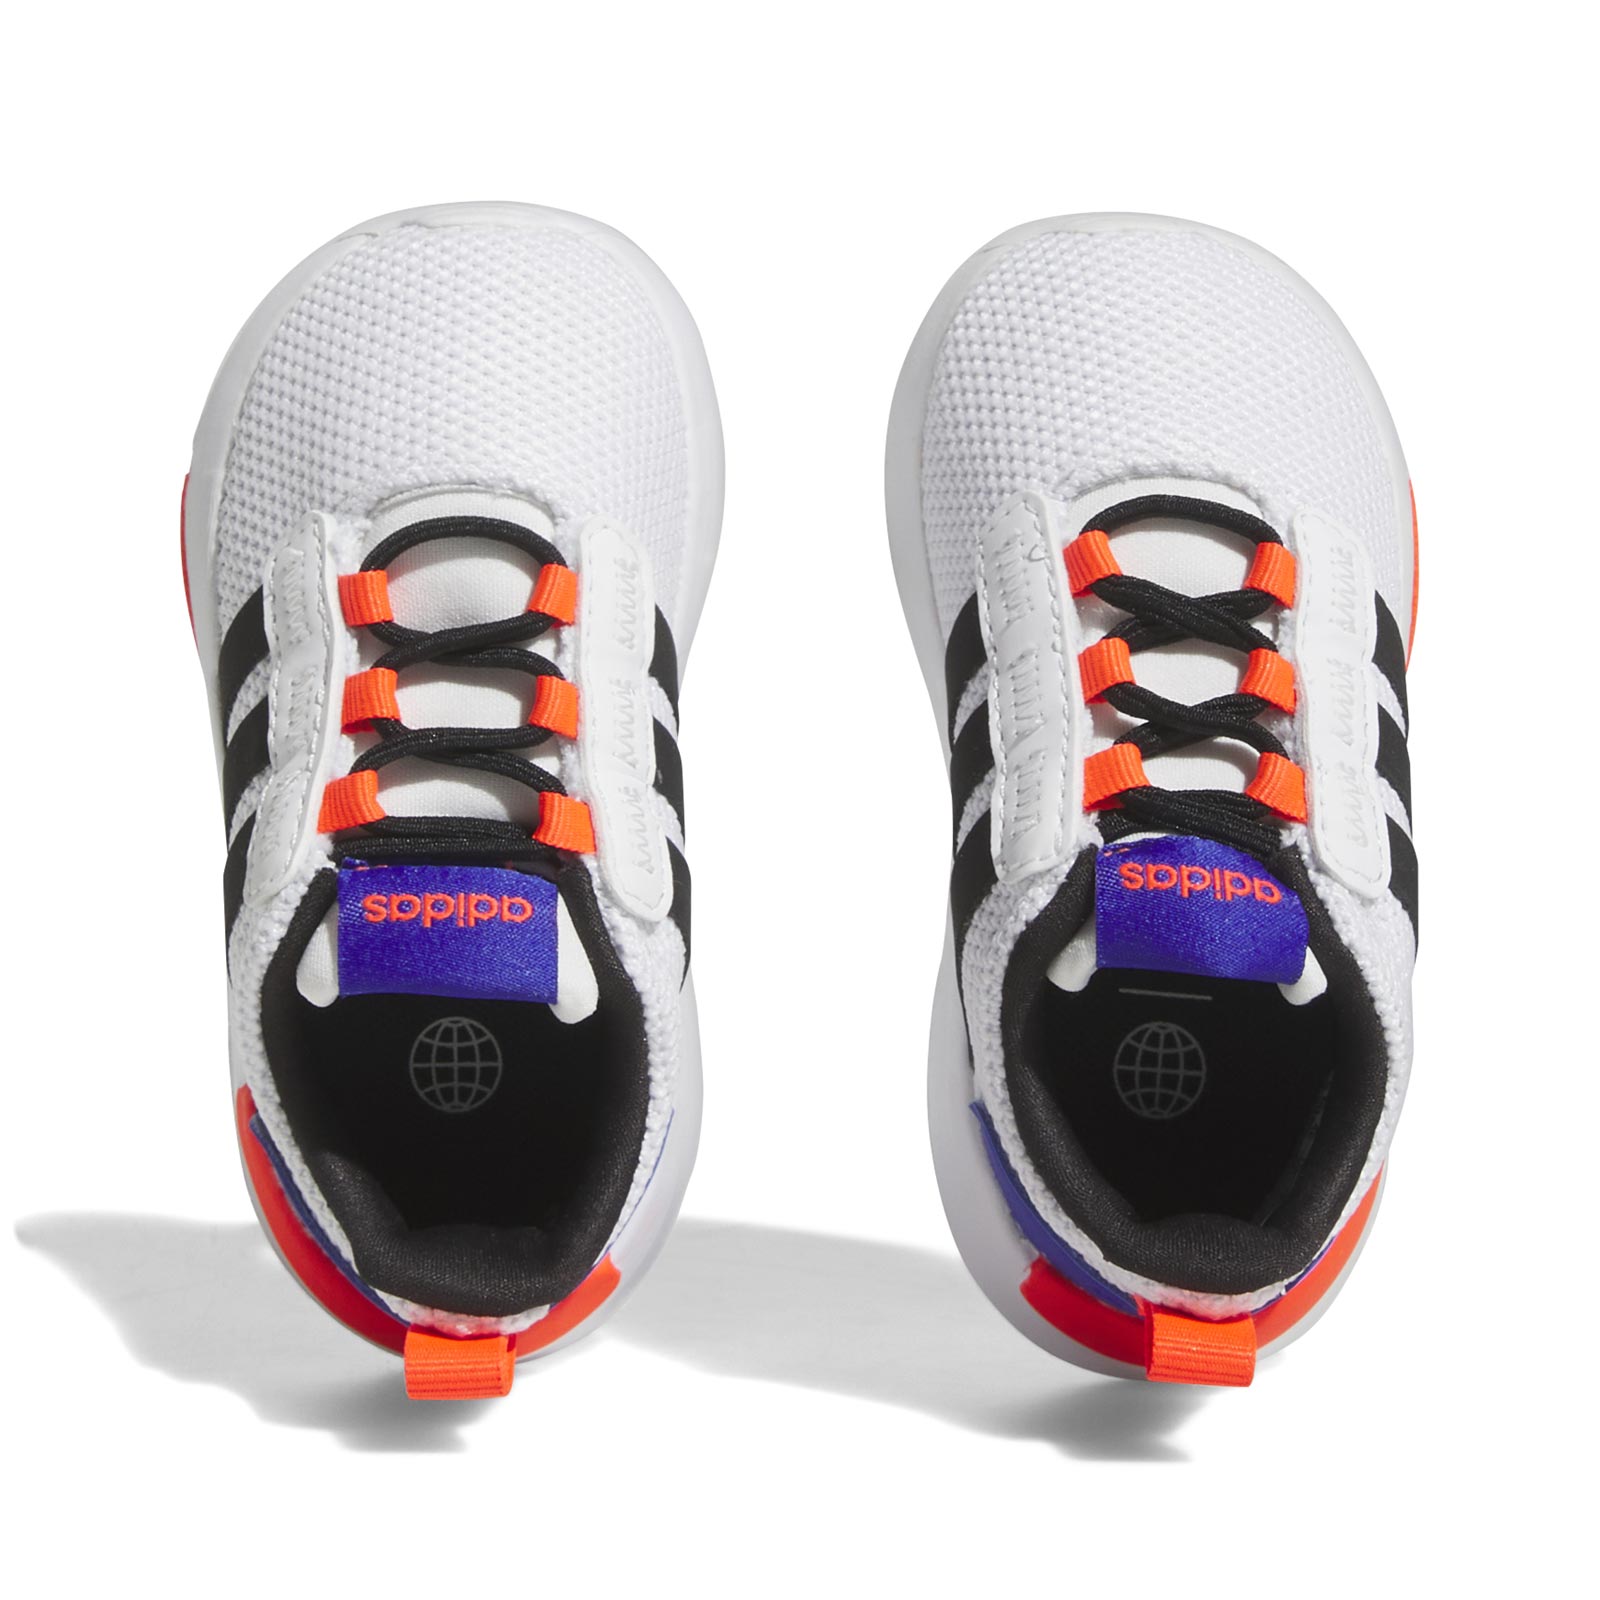 adidas Racer TR21 Infant Shoes